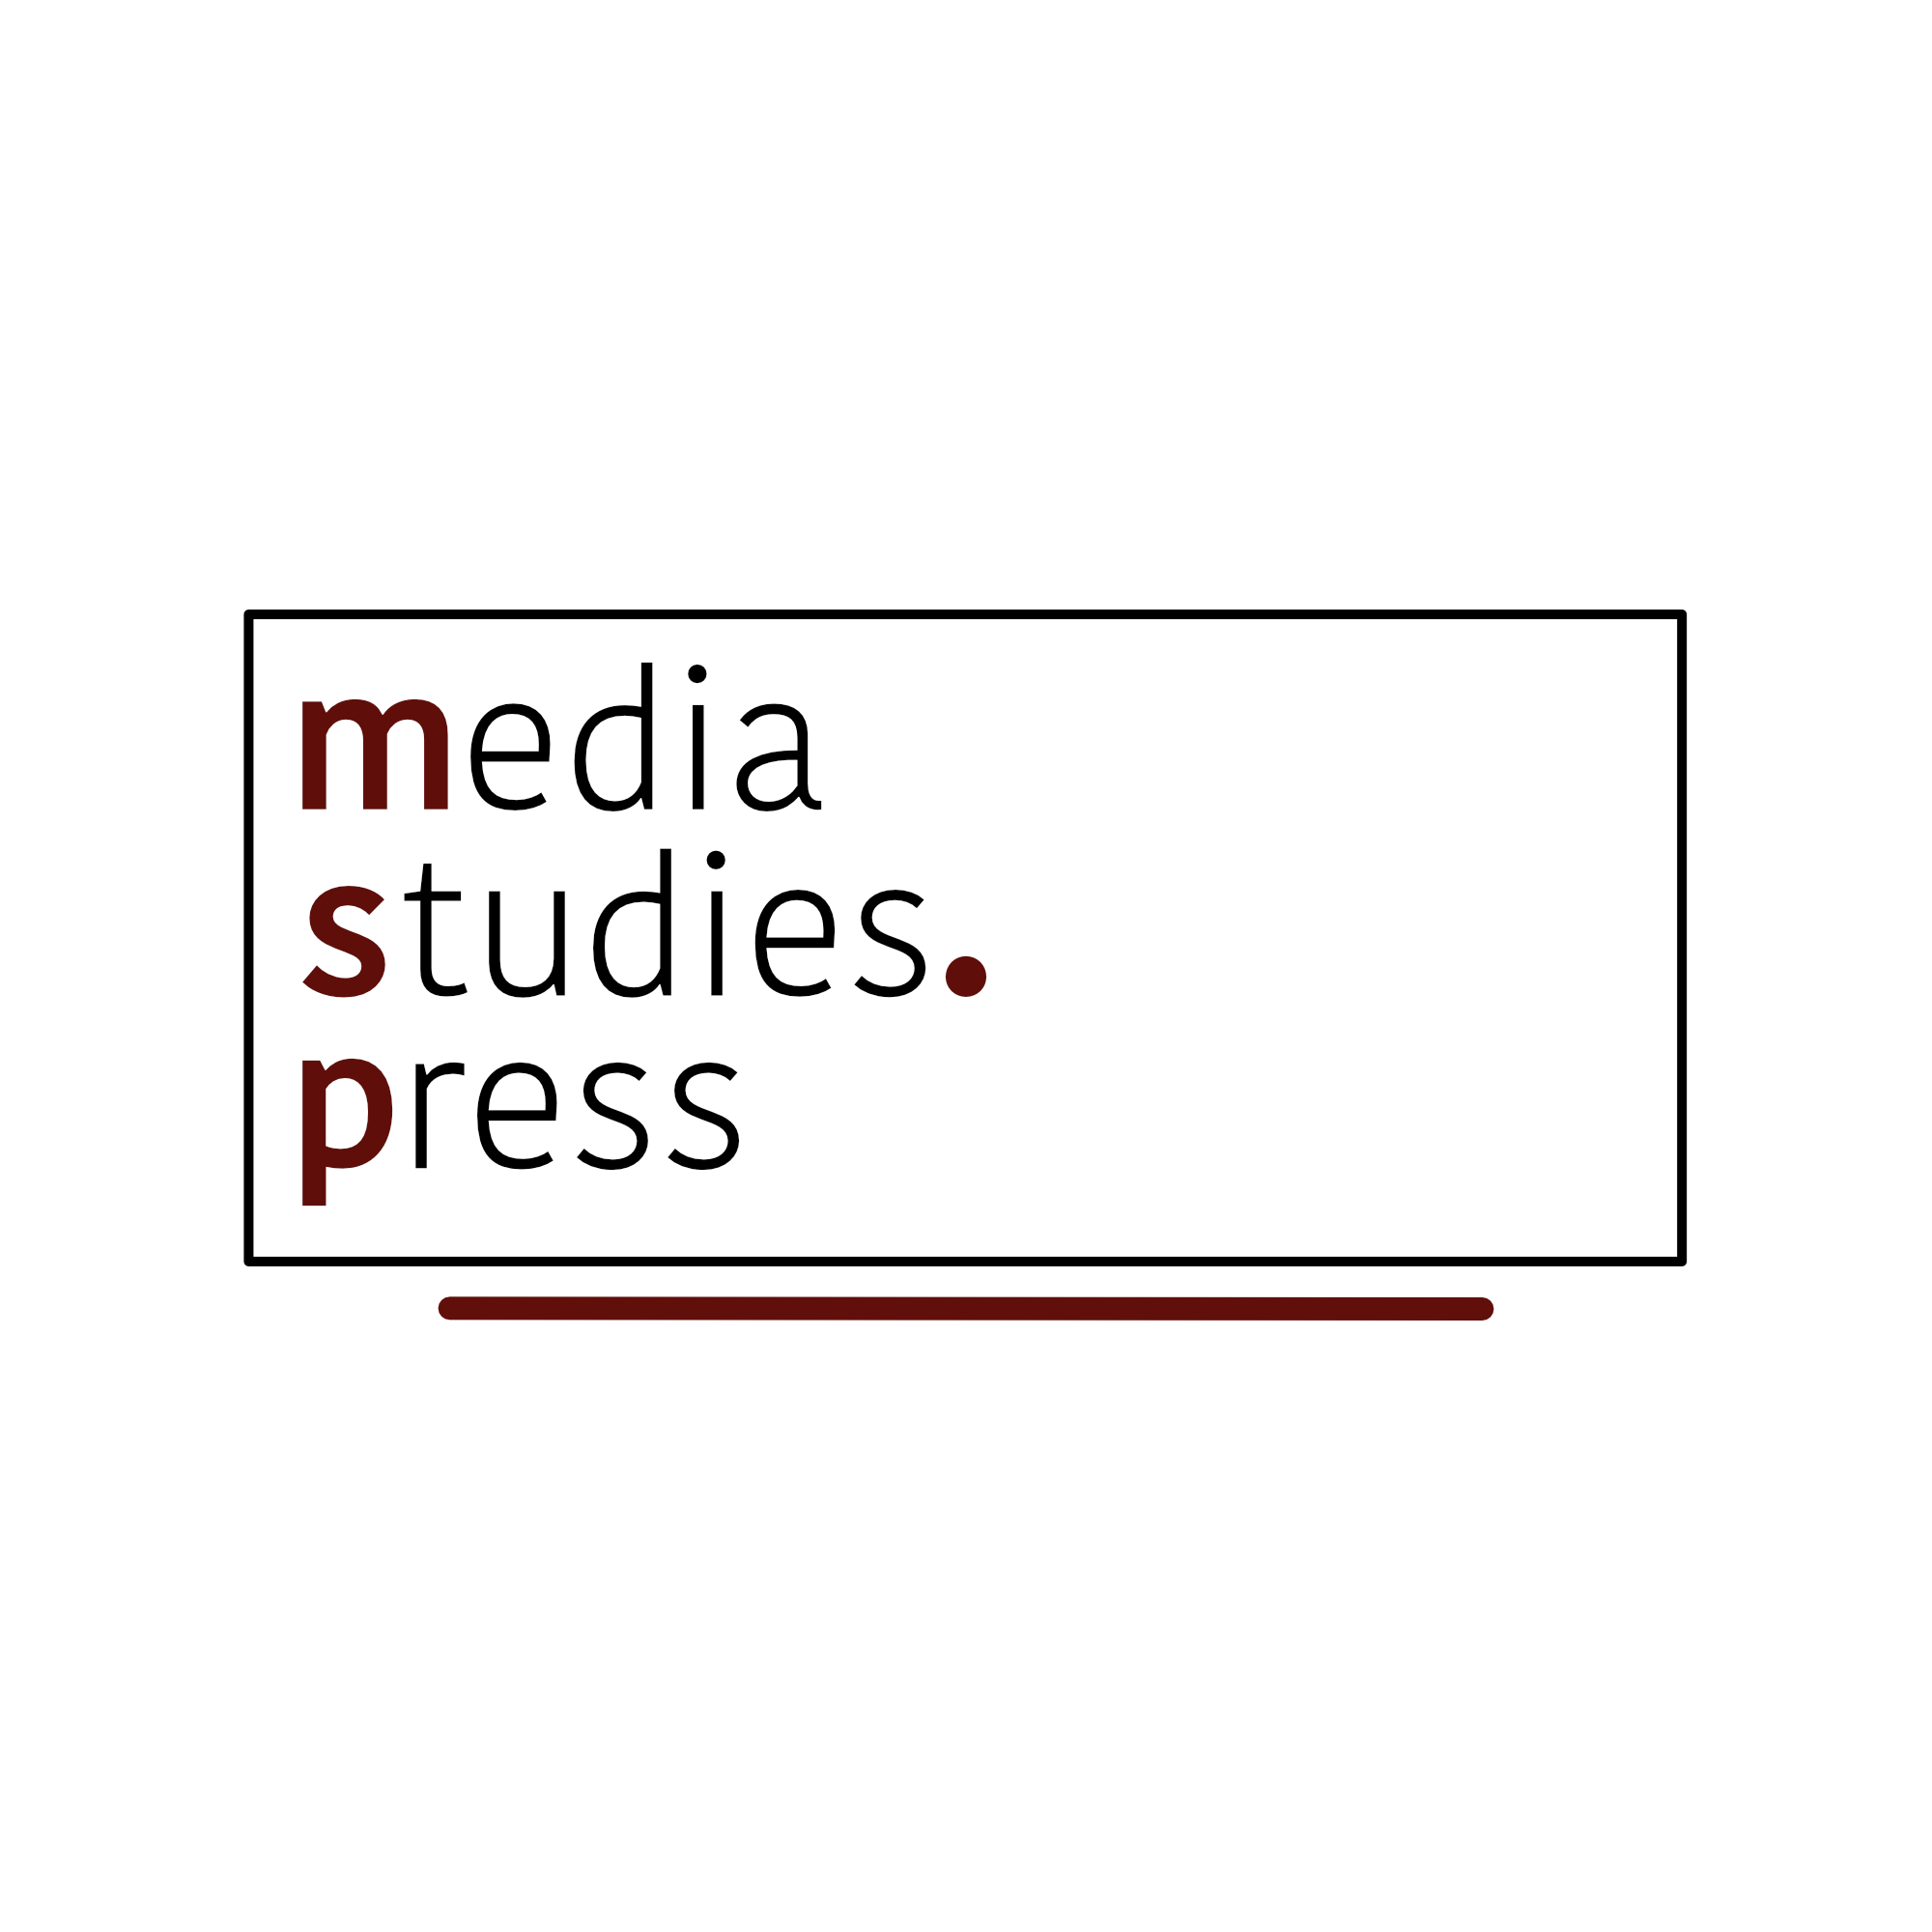 a non-profit, scholar-led publisher of open-access books and the History of Media Studies journal